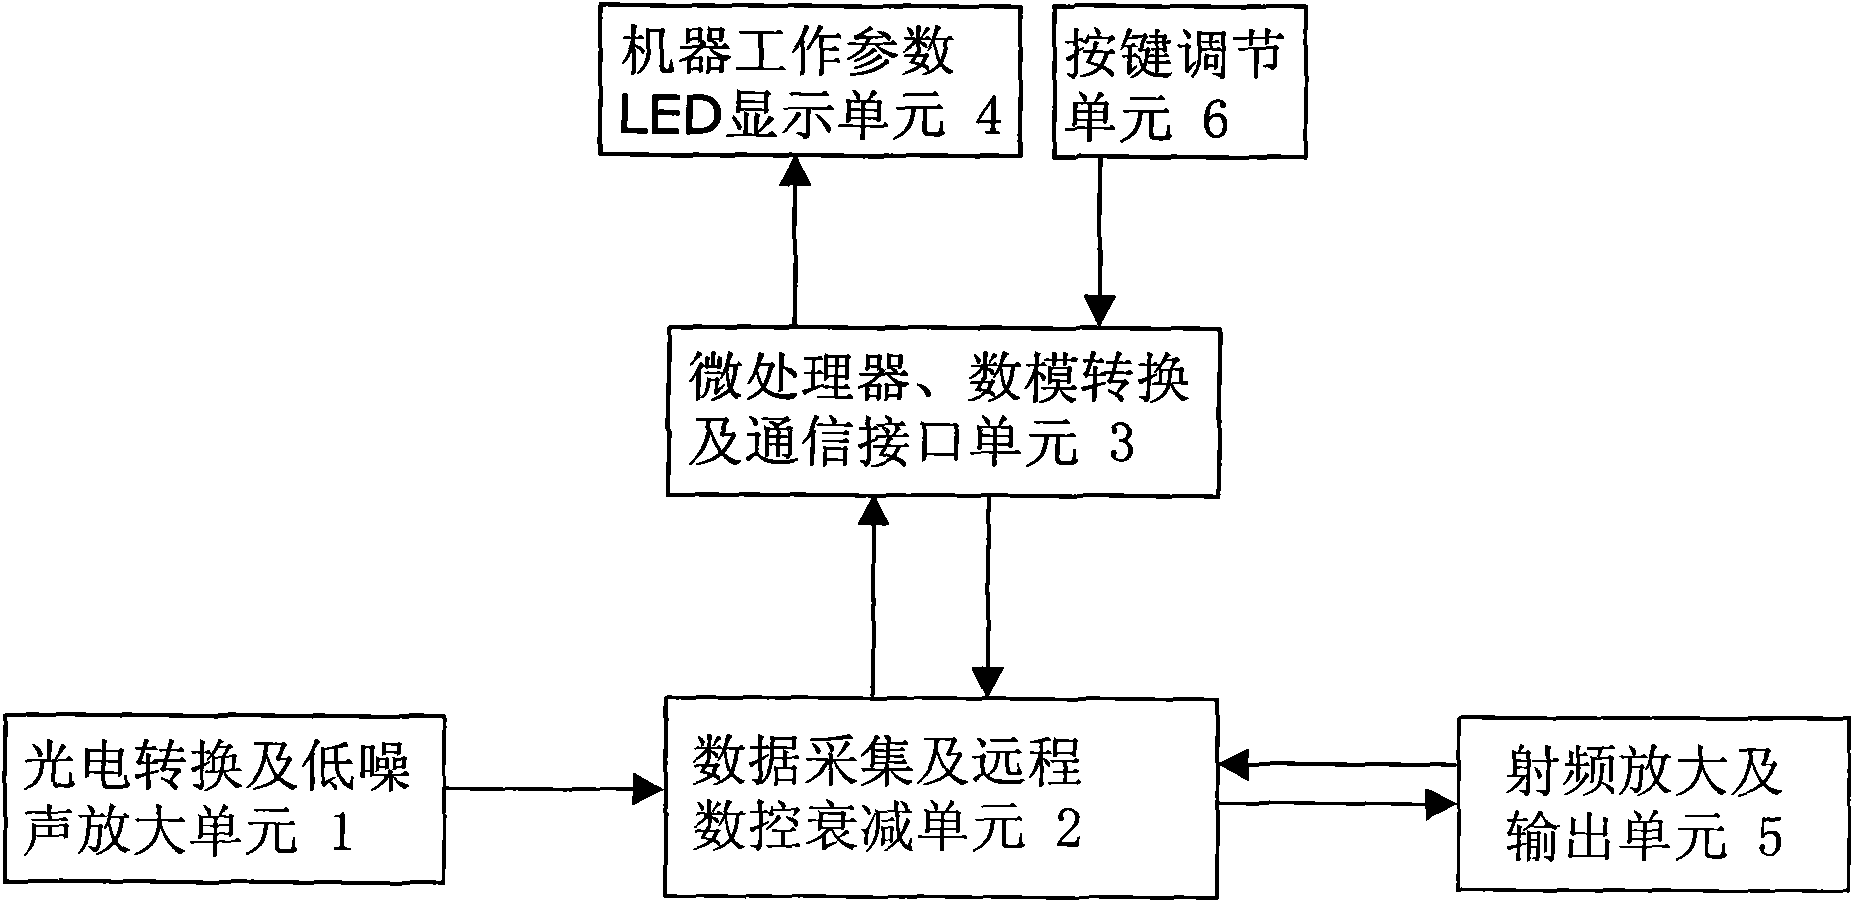 Remote monitoring and controlling type optical receiver